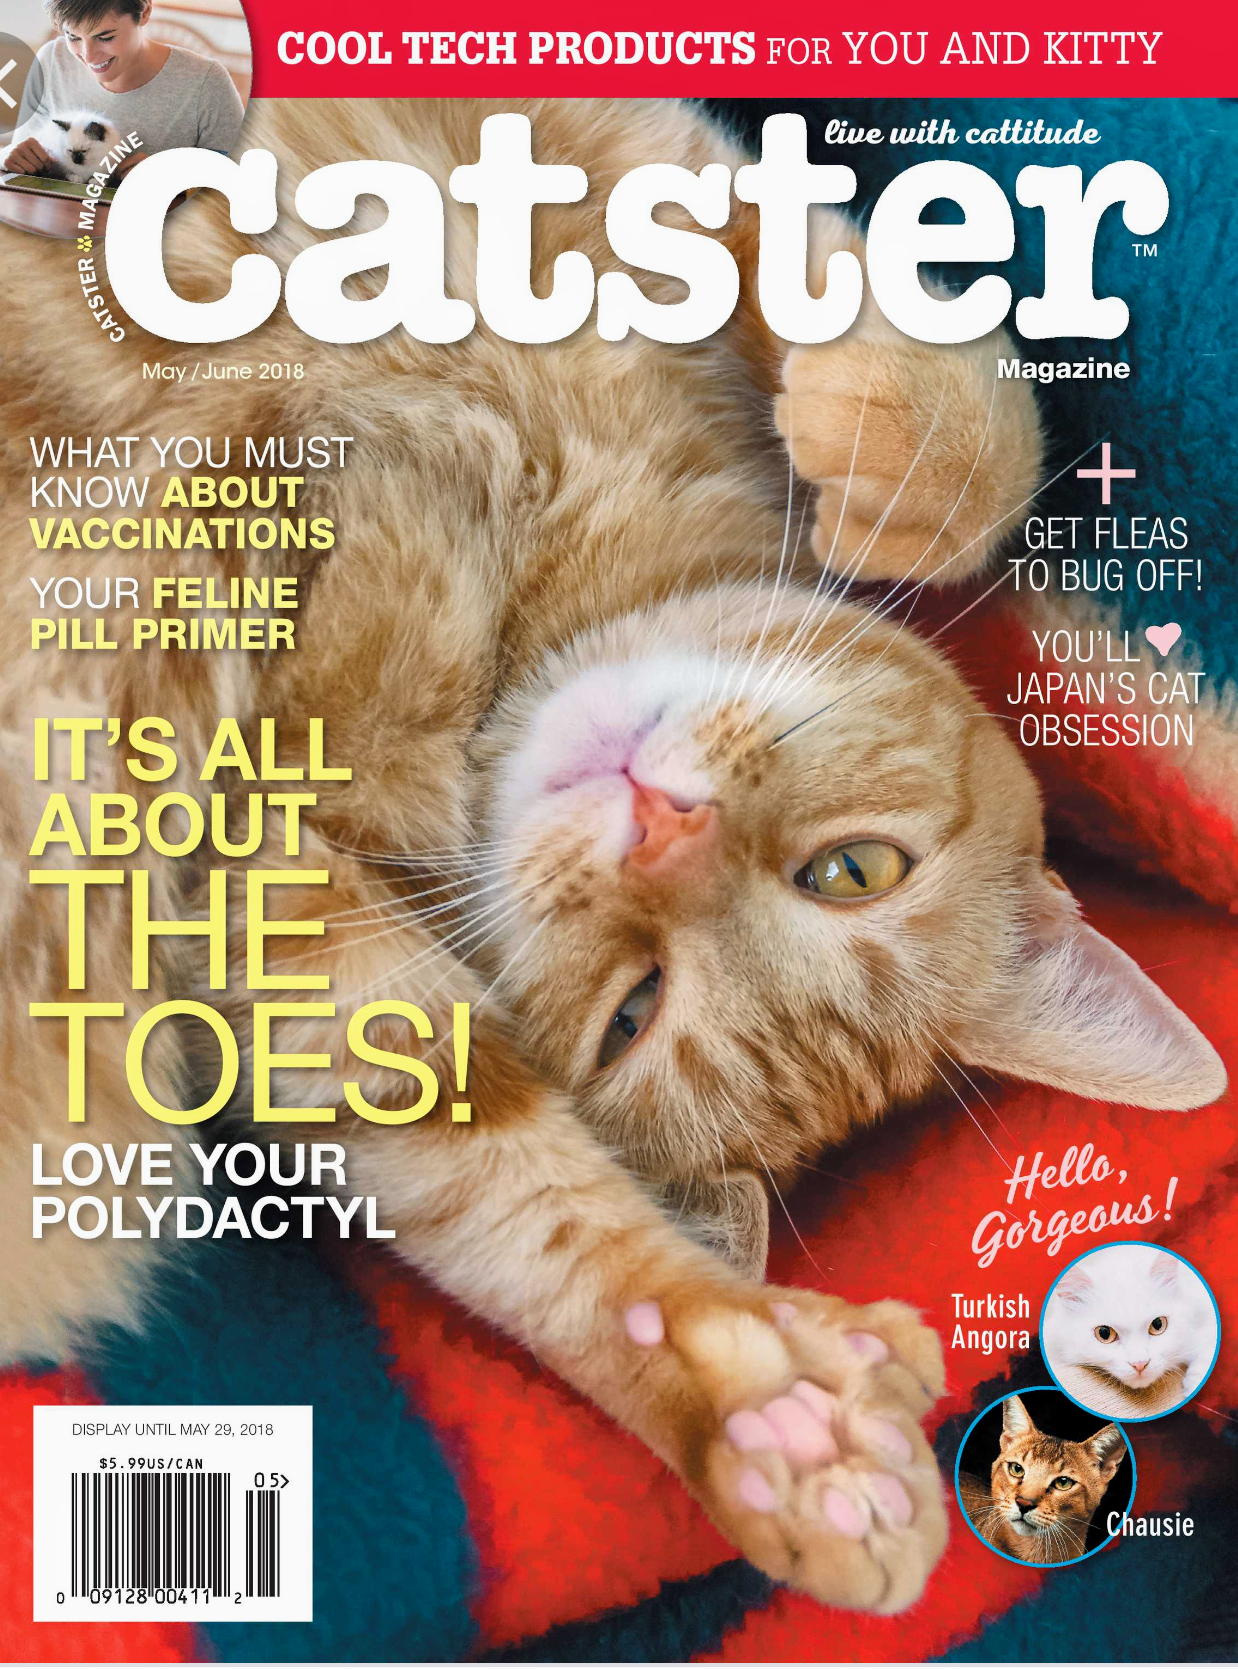 We made it into Catster Magazine!